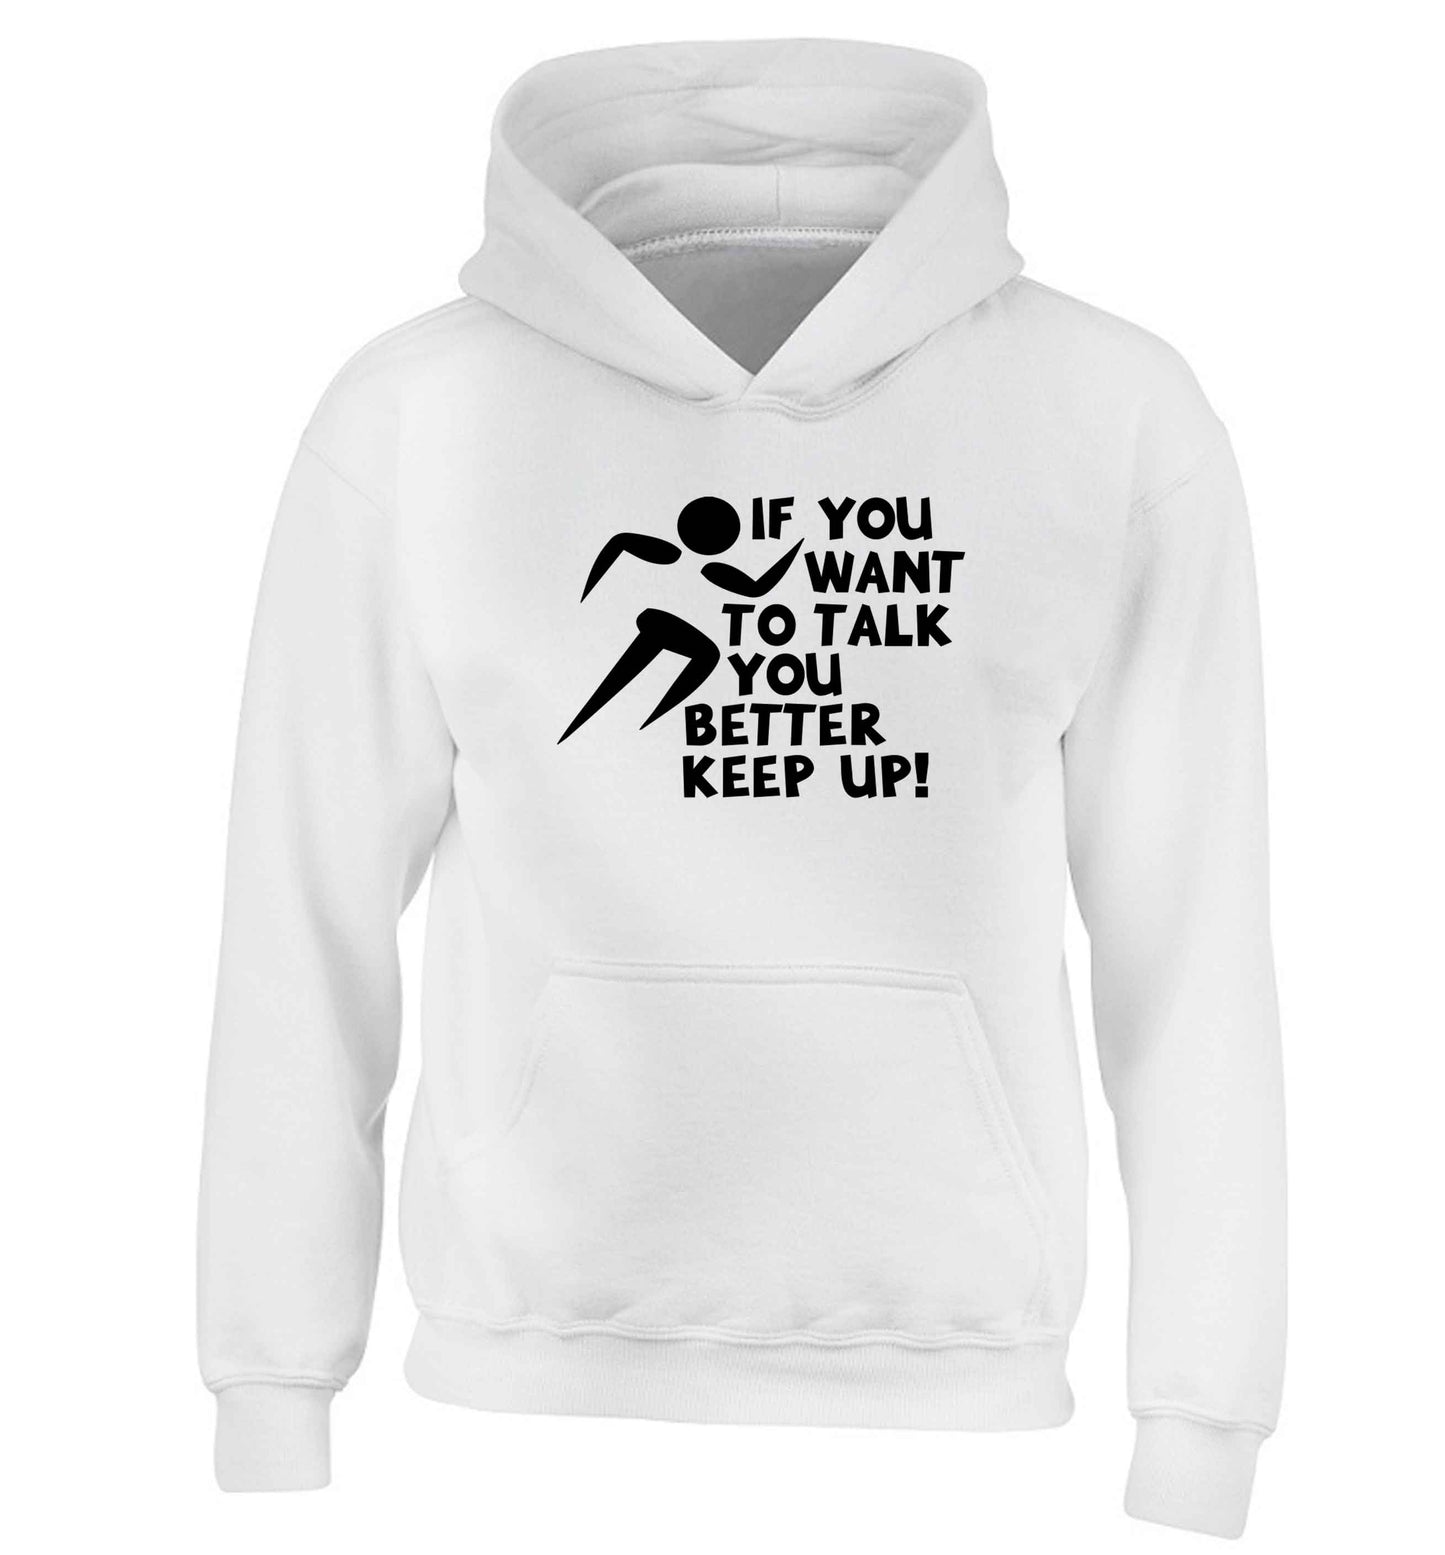 If you want to talk you better keep up! children's white hoodie 12-13 Years